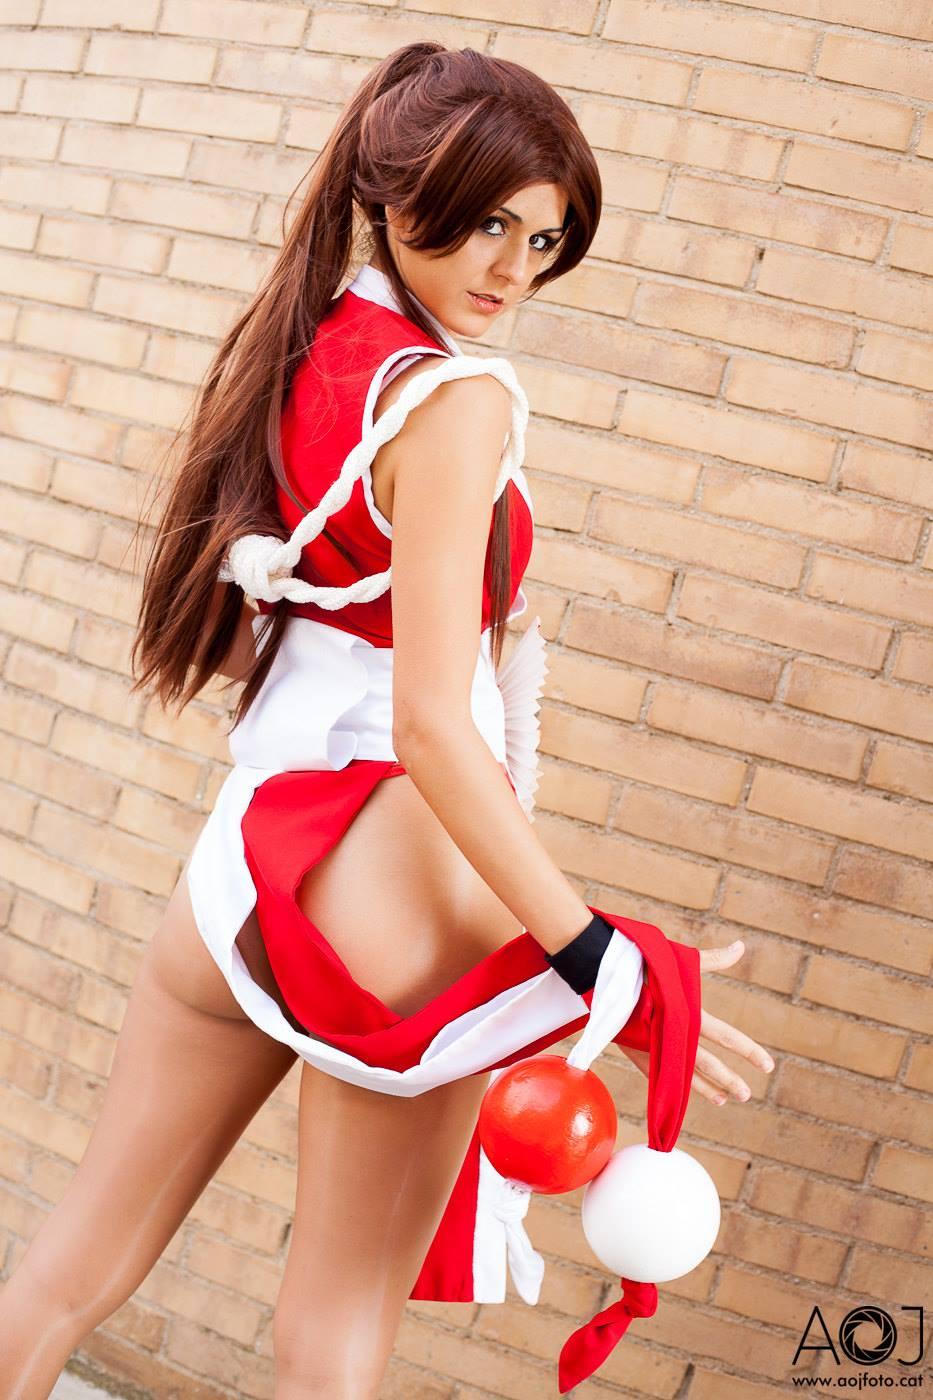 50+ Hot Pictures Of Mai Shiranui From Fatal Fury And The King Of Fighters Series 14